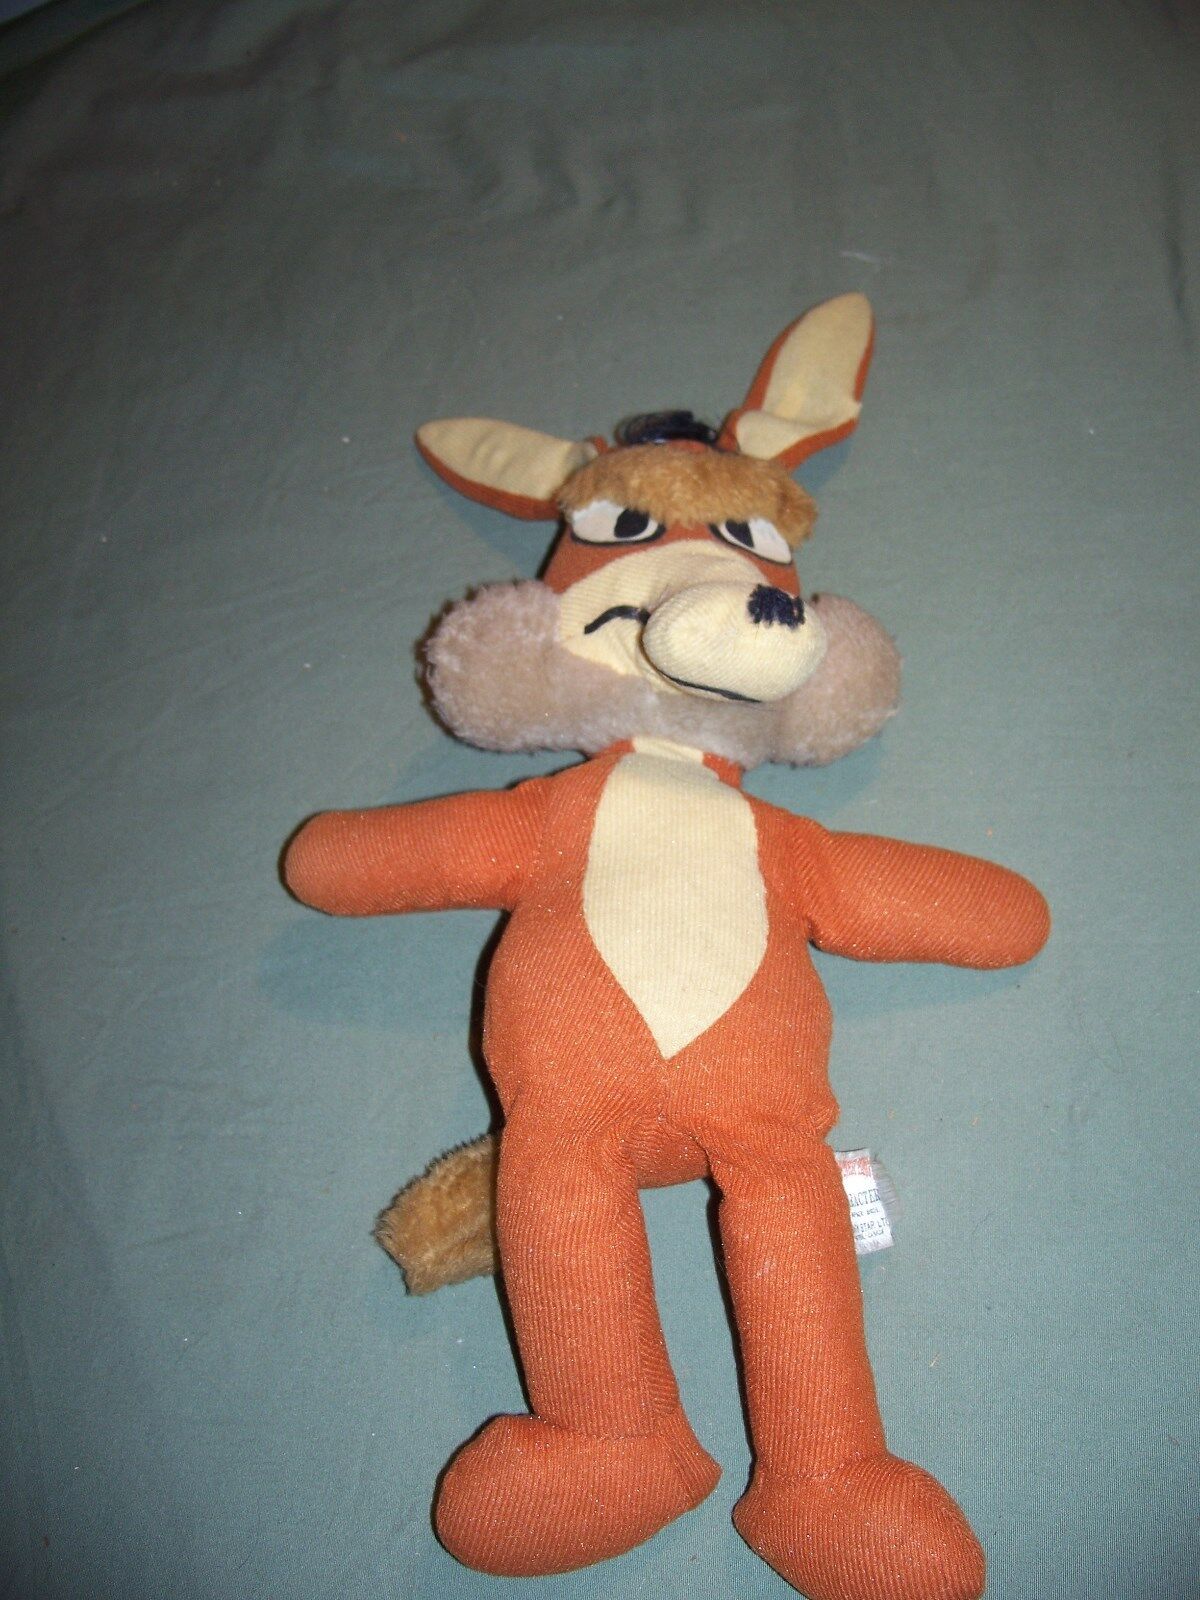 Vintage 1971 Wile Coyote Plush Stuffed Toy from Warner Bros. 14 inch 